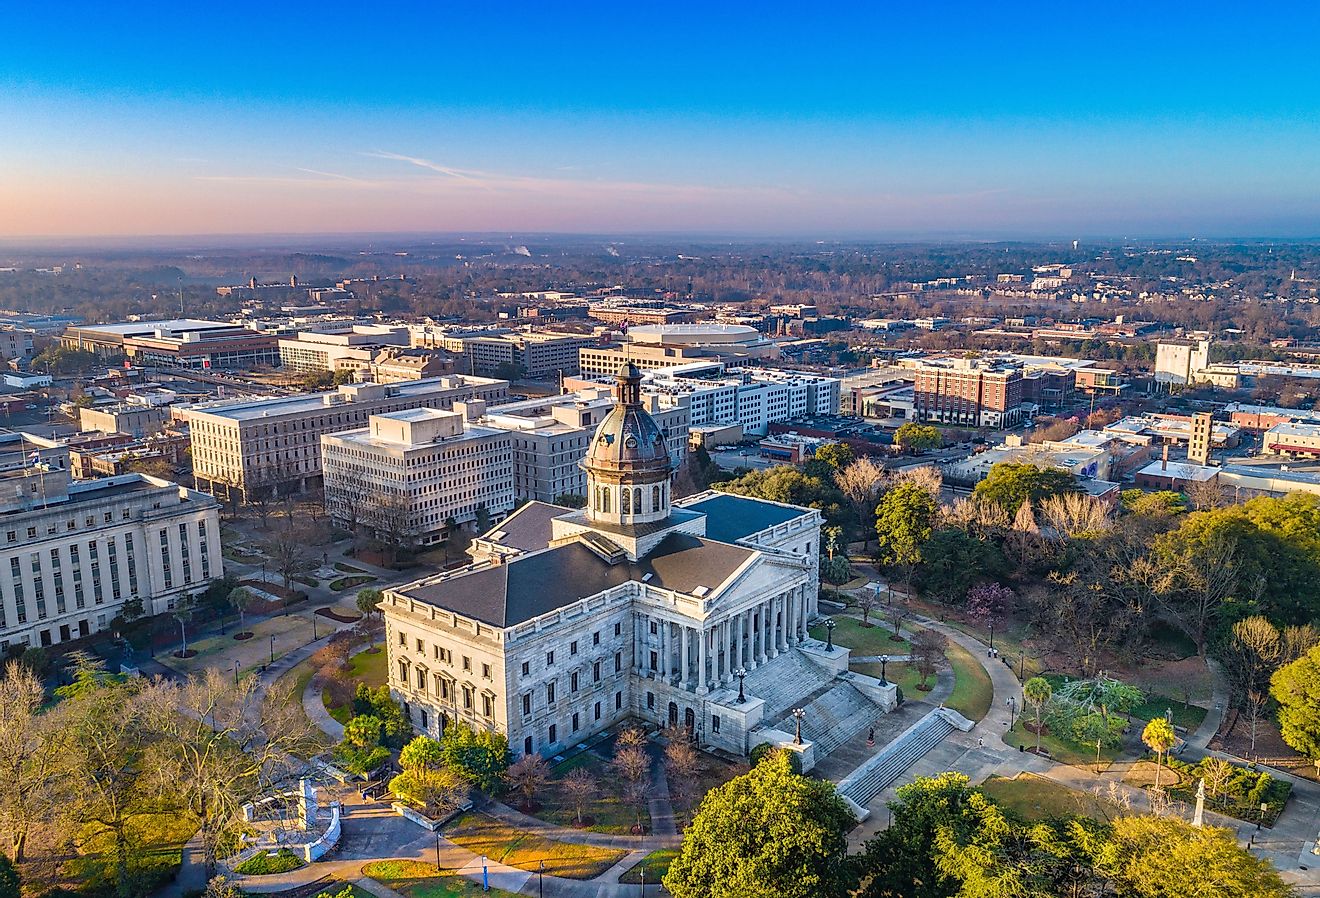 Drone aerial view of downtown Columbia, South Carolina in morning. Image credit Kevin Ruck via Shutterstock.